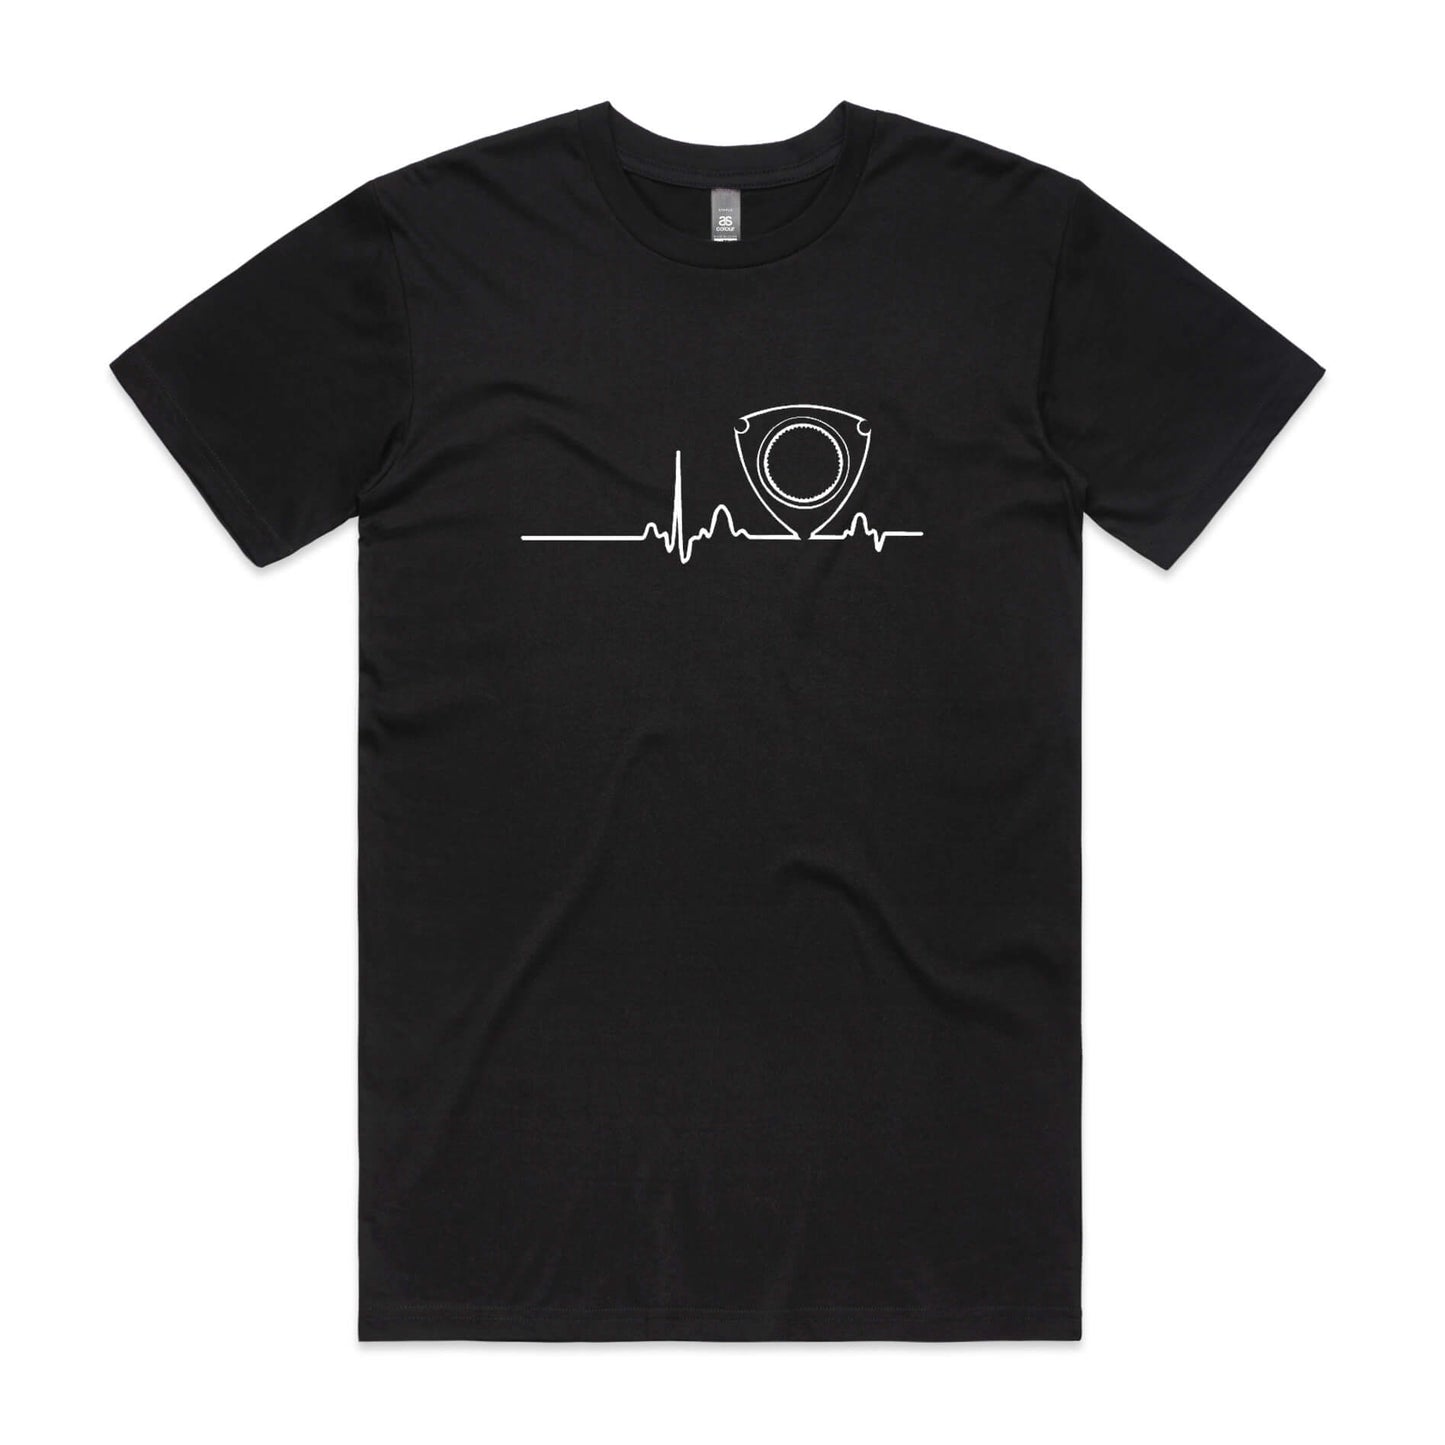 Rotary pulse t-shirt in black